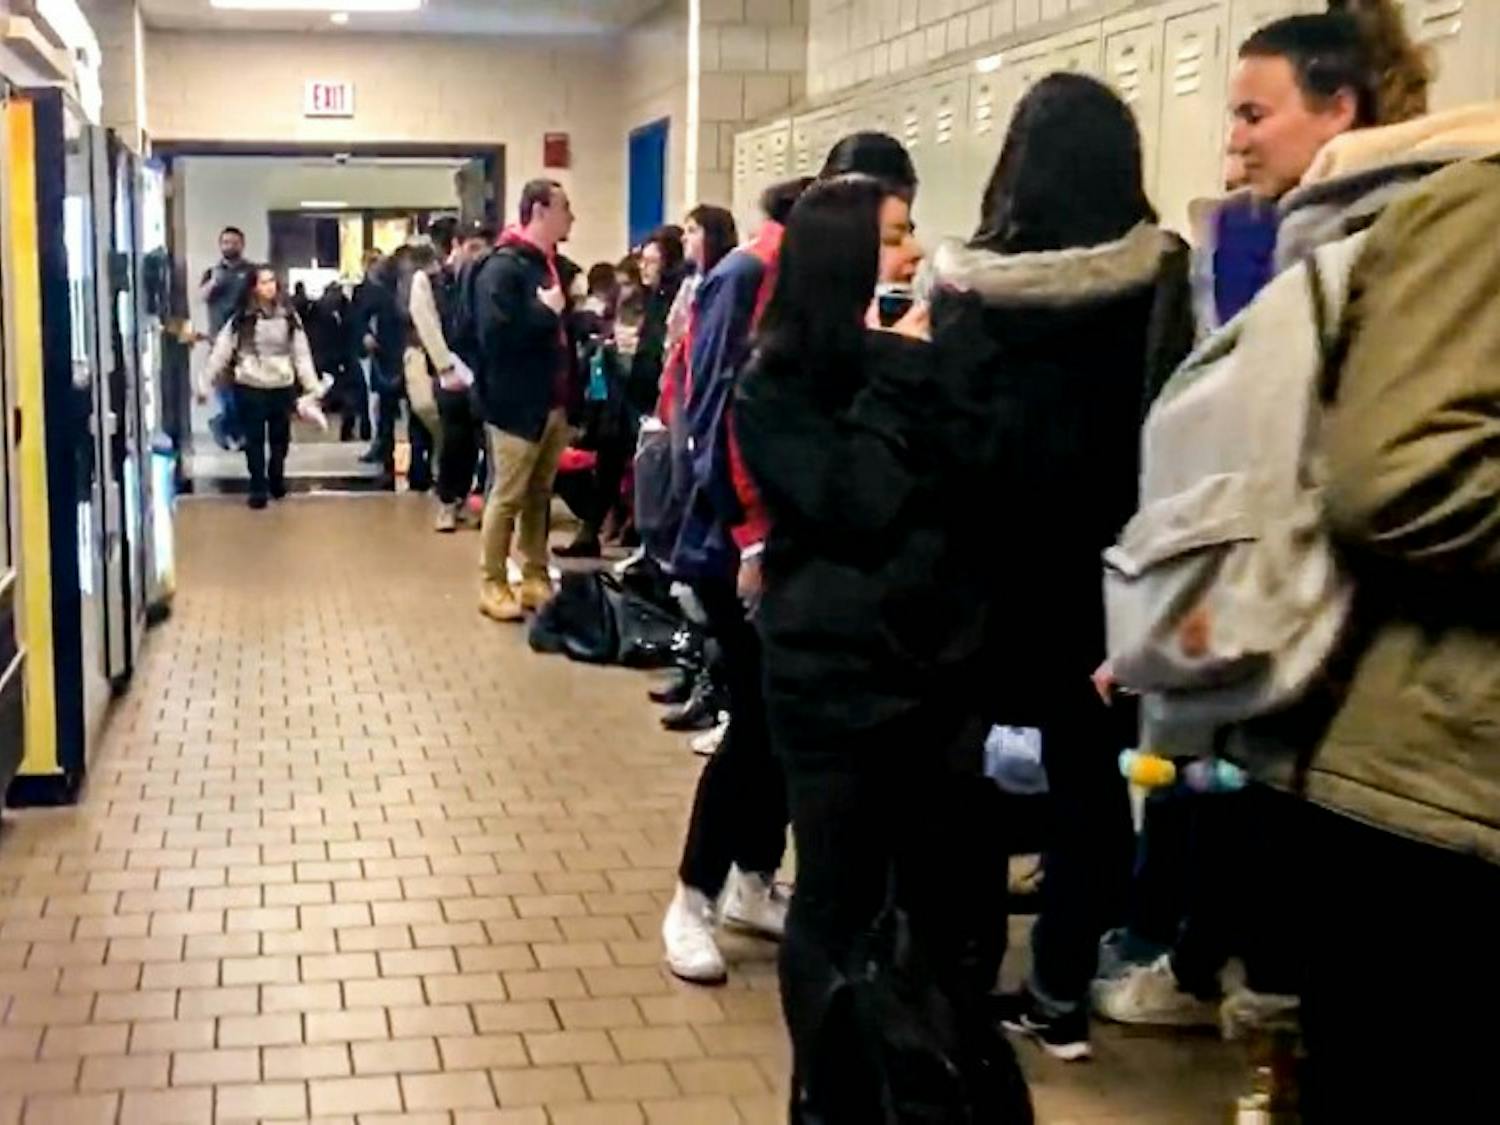 Students are upset with the chaos and disorganization regarding the wait in line for Spring Gala, as some waited in line for hours and did not receive a ticket.